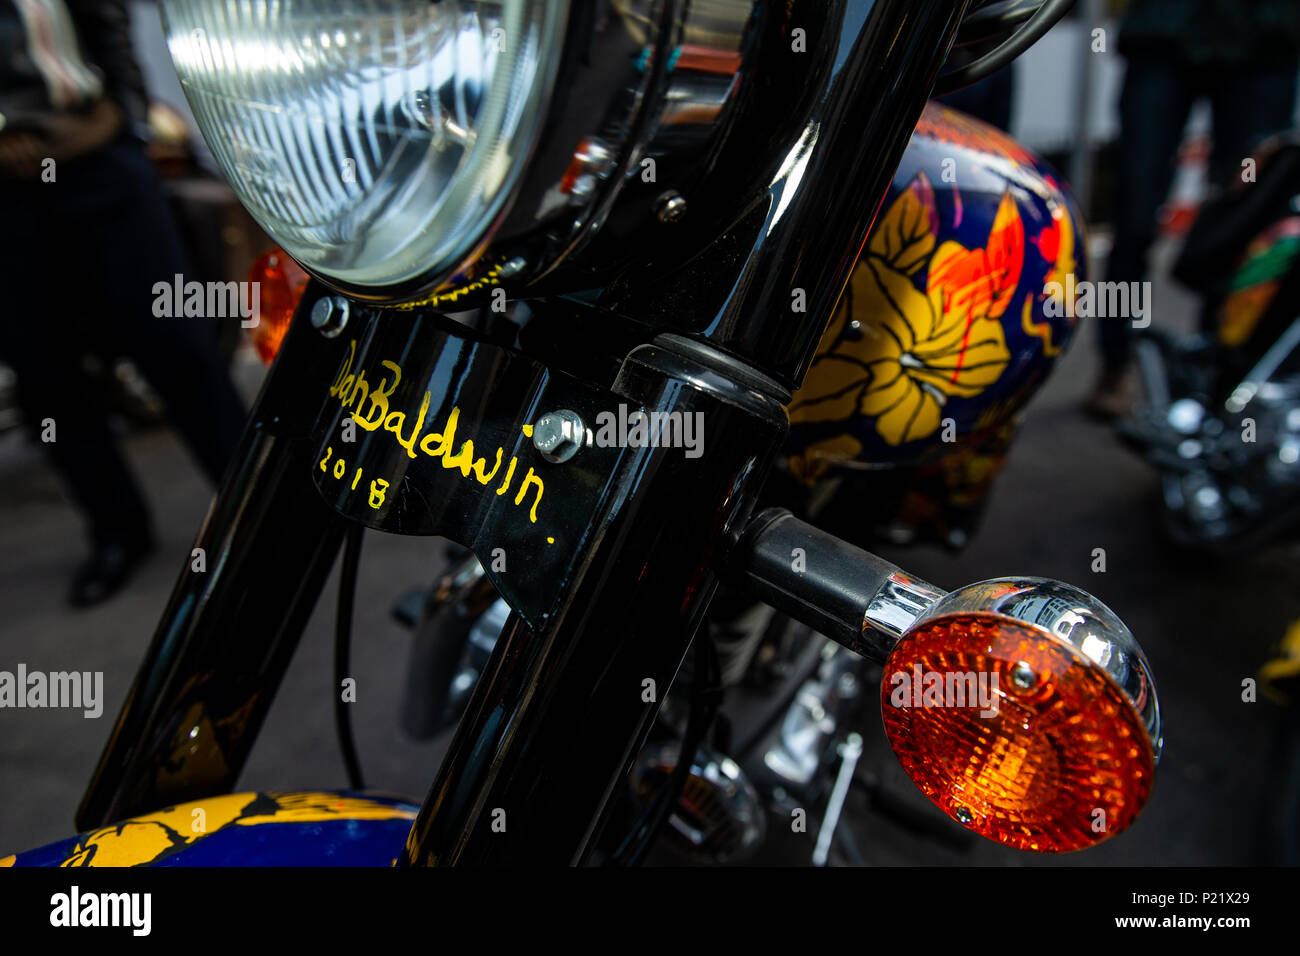 Details of the customised Royal Enfield fleet for the Elephant Family's 'Concours d'Ã©lÃ©phant' dawn raid during the photocall in London. PRESS ASSOCIATION Photo. Picture date: Tuesday June 12, 2018. A customised fleet of 12 Ambassador cars, eight Royal Enfield motorbikes, a tuk tuk and a Gujarati Chagda made up the 'Concours d'Ã©lÃ©phant' - a cavalcade of designer inspired, quintessentially Indian vehicles - while thirty beautifully decorated elephant sculptures will stand sentinel across the capital, ambassadors for their cousins in the wild. Stock Photo